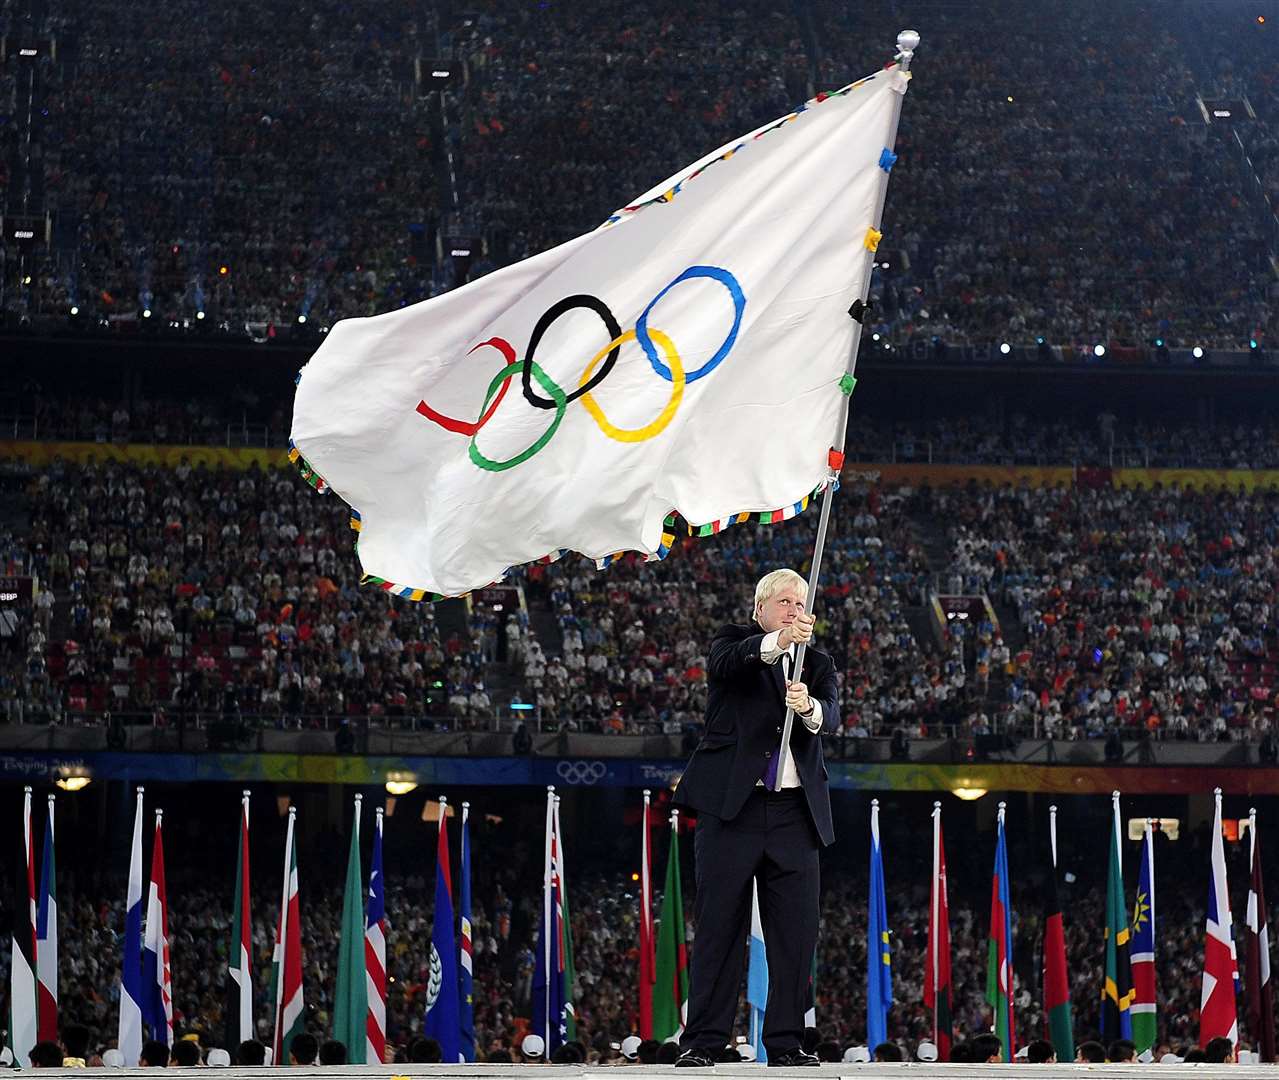 Boris Johnson appeared at the closing ceremony when the 2008 Summer Olympics were held in Beijing (John Giles/PA)